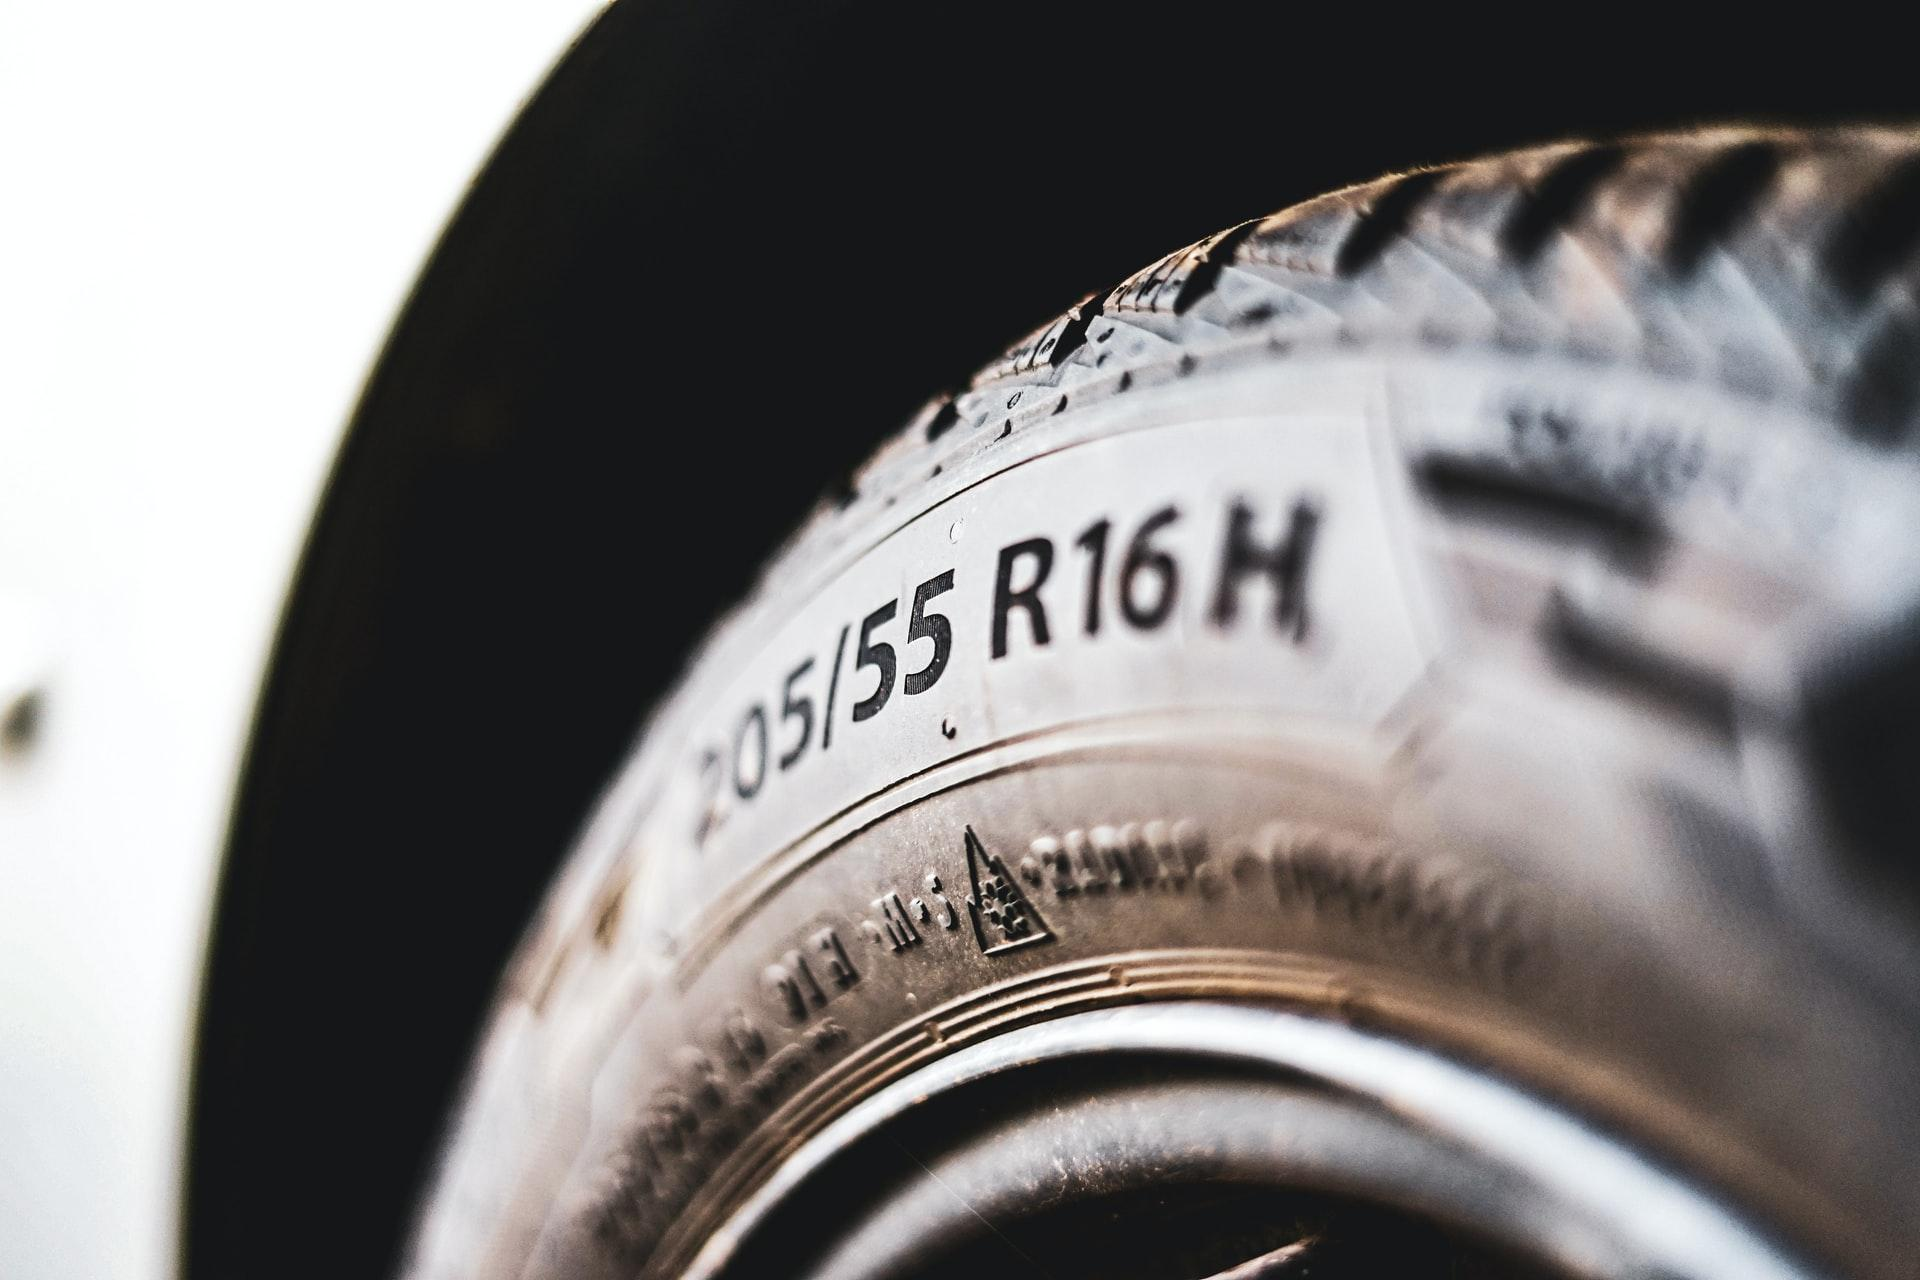 Make Sure Your Tires Are in Good Condition